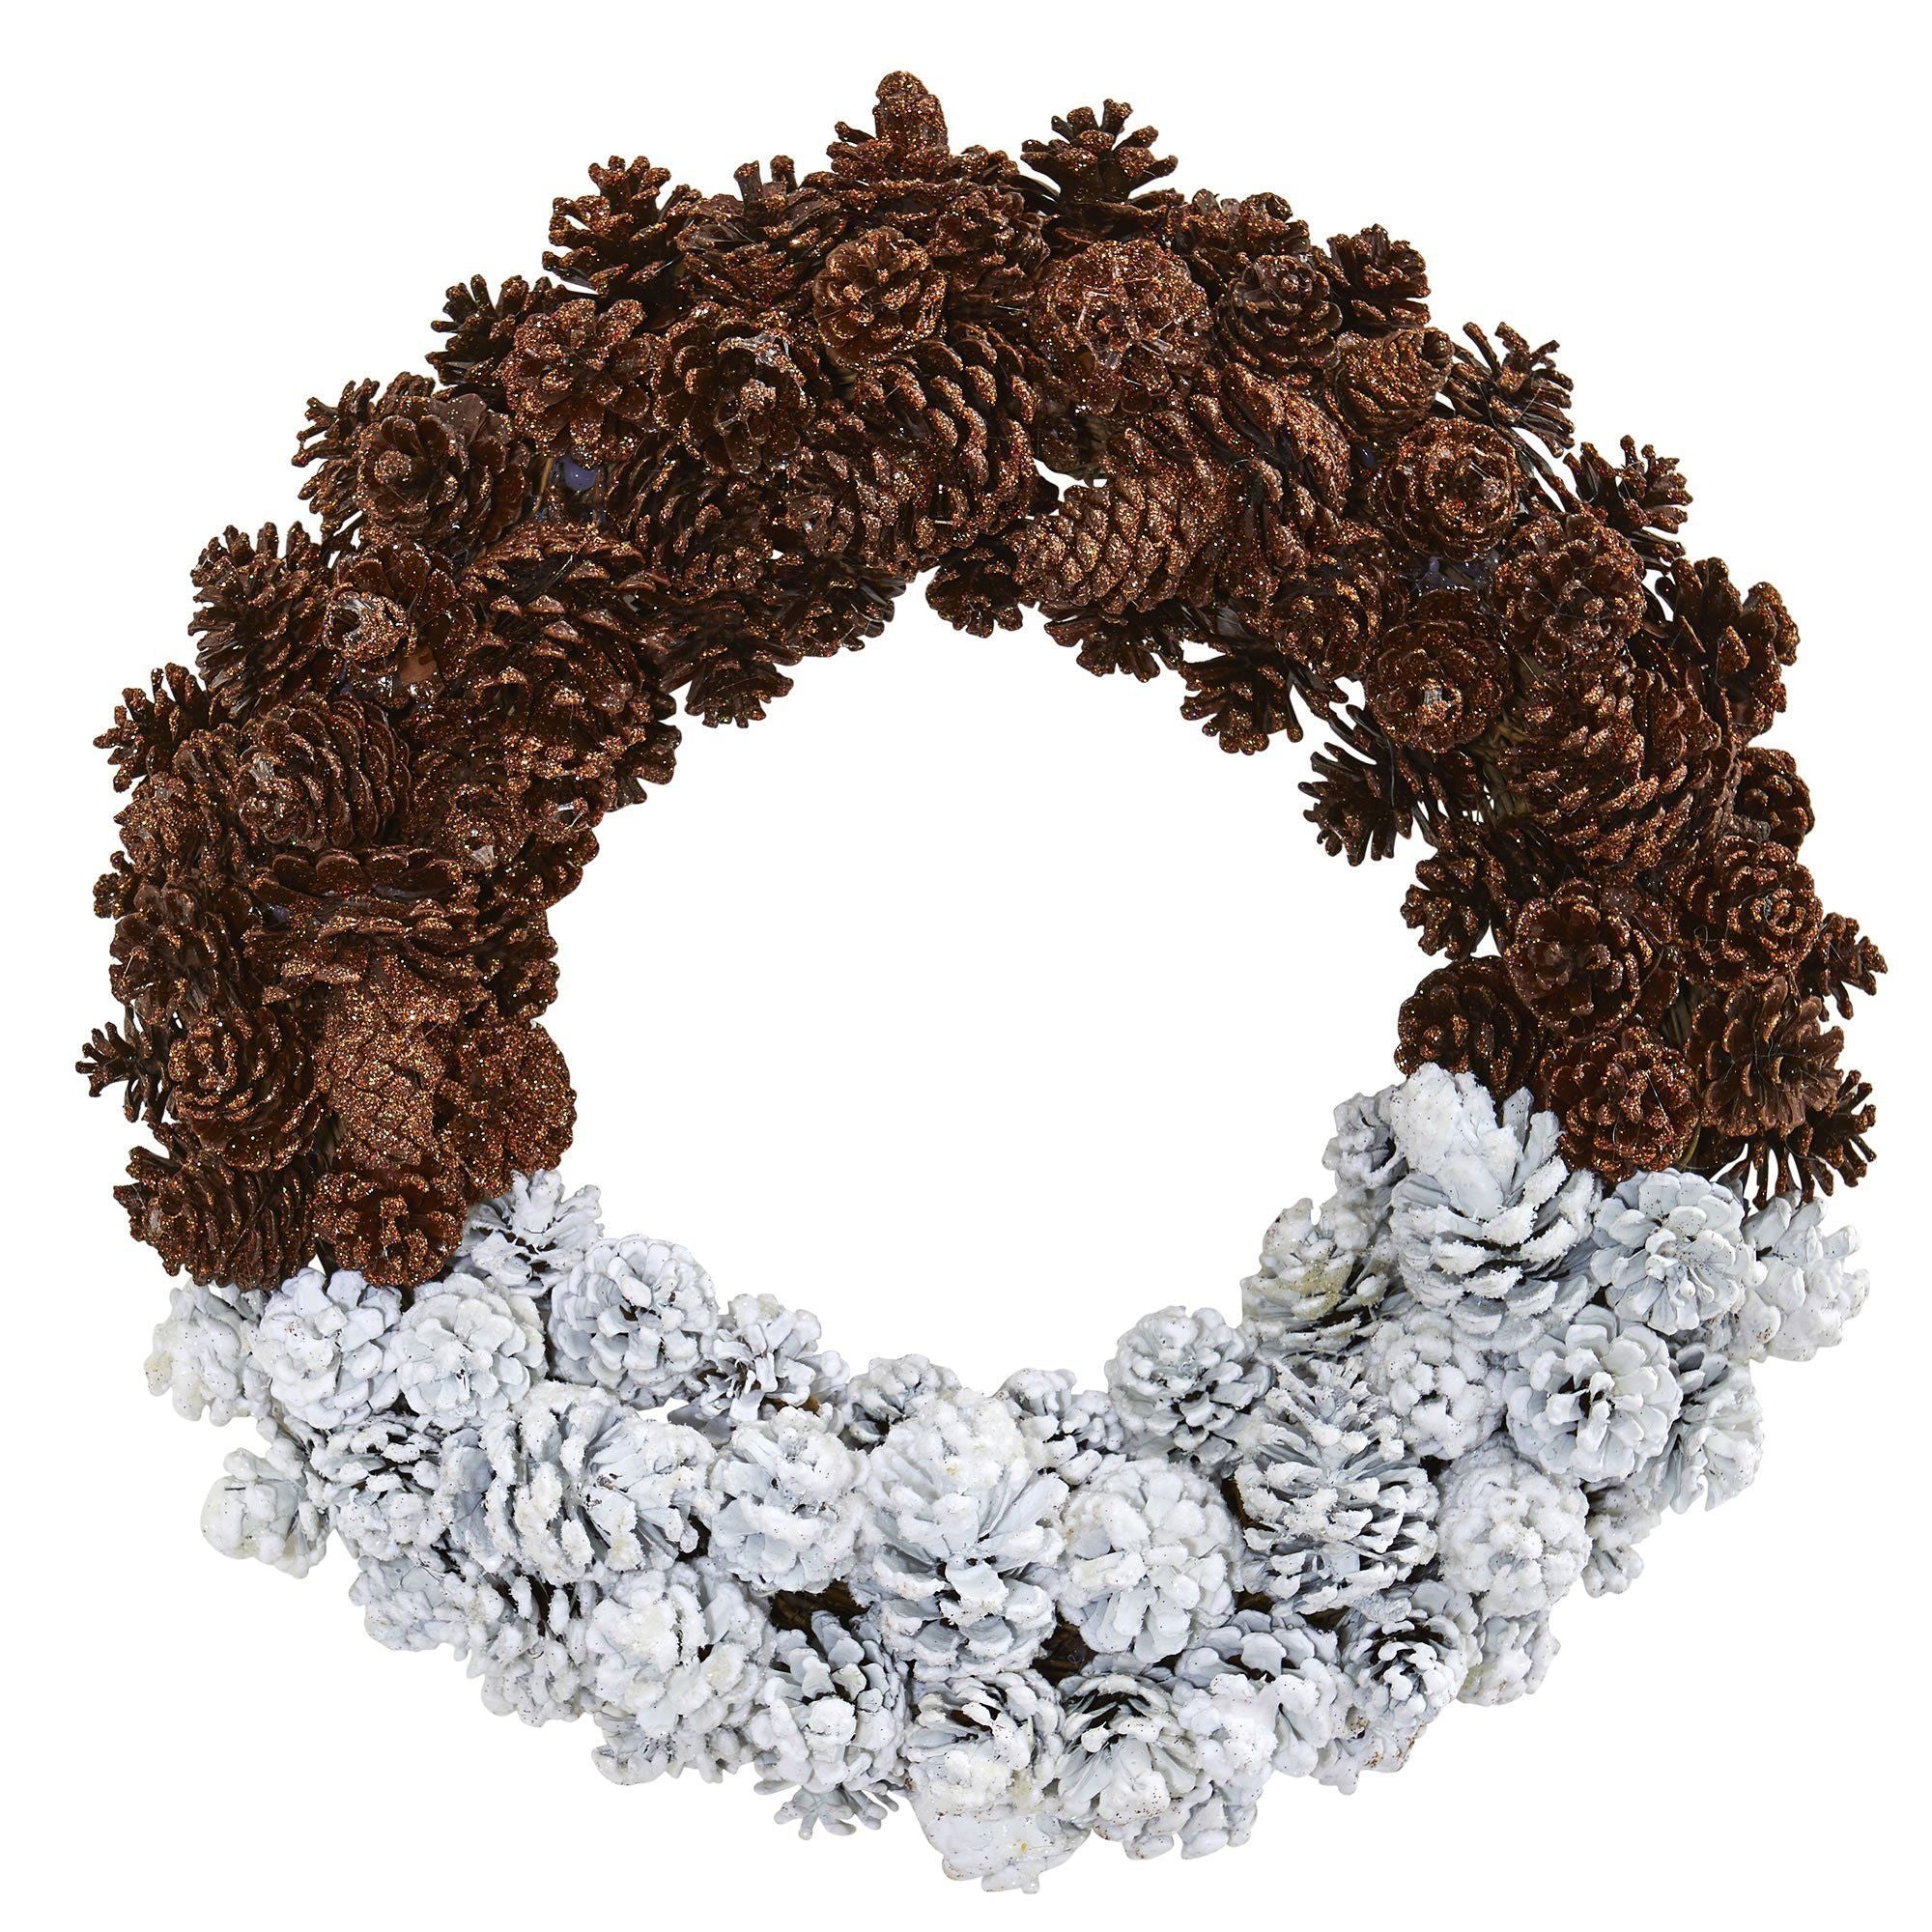 Frosted pine cones sprinkled atop a round evergreen wreath on burlap